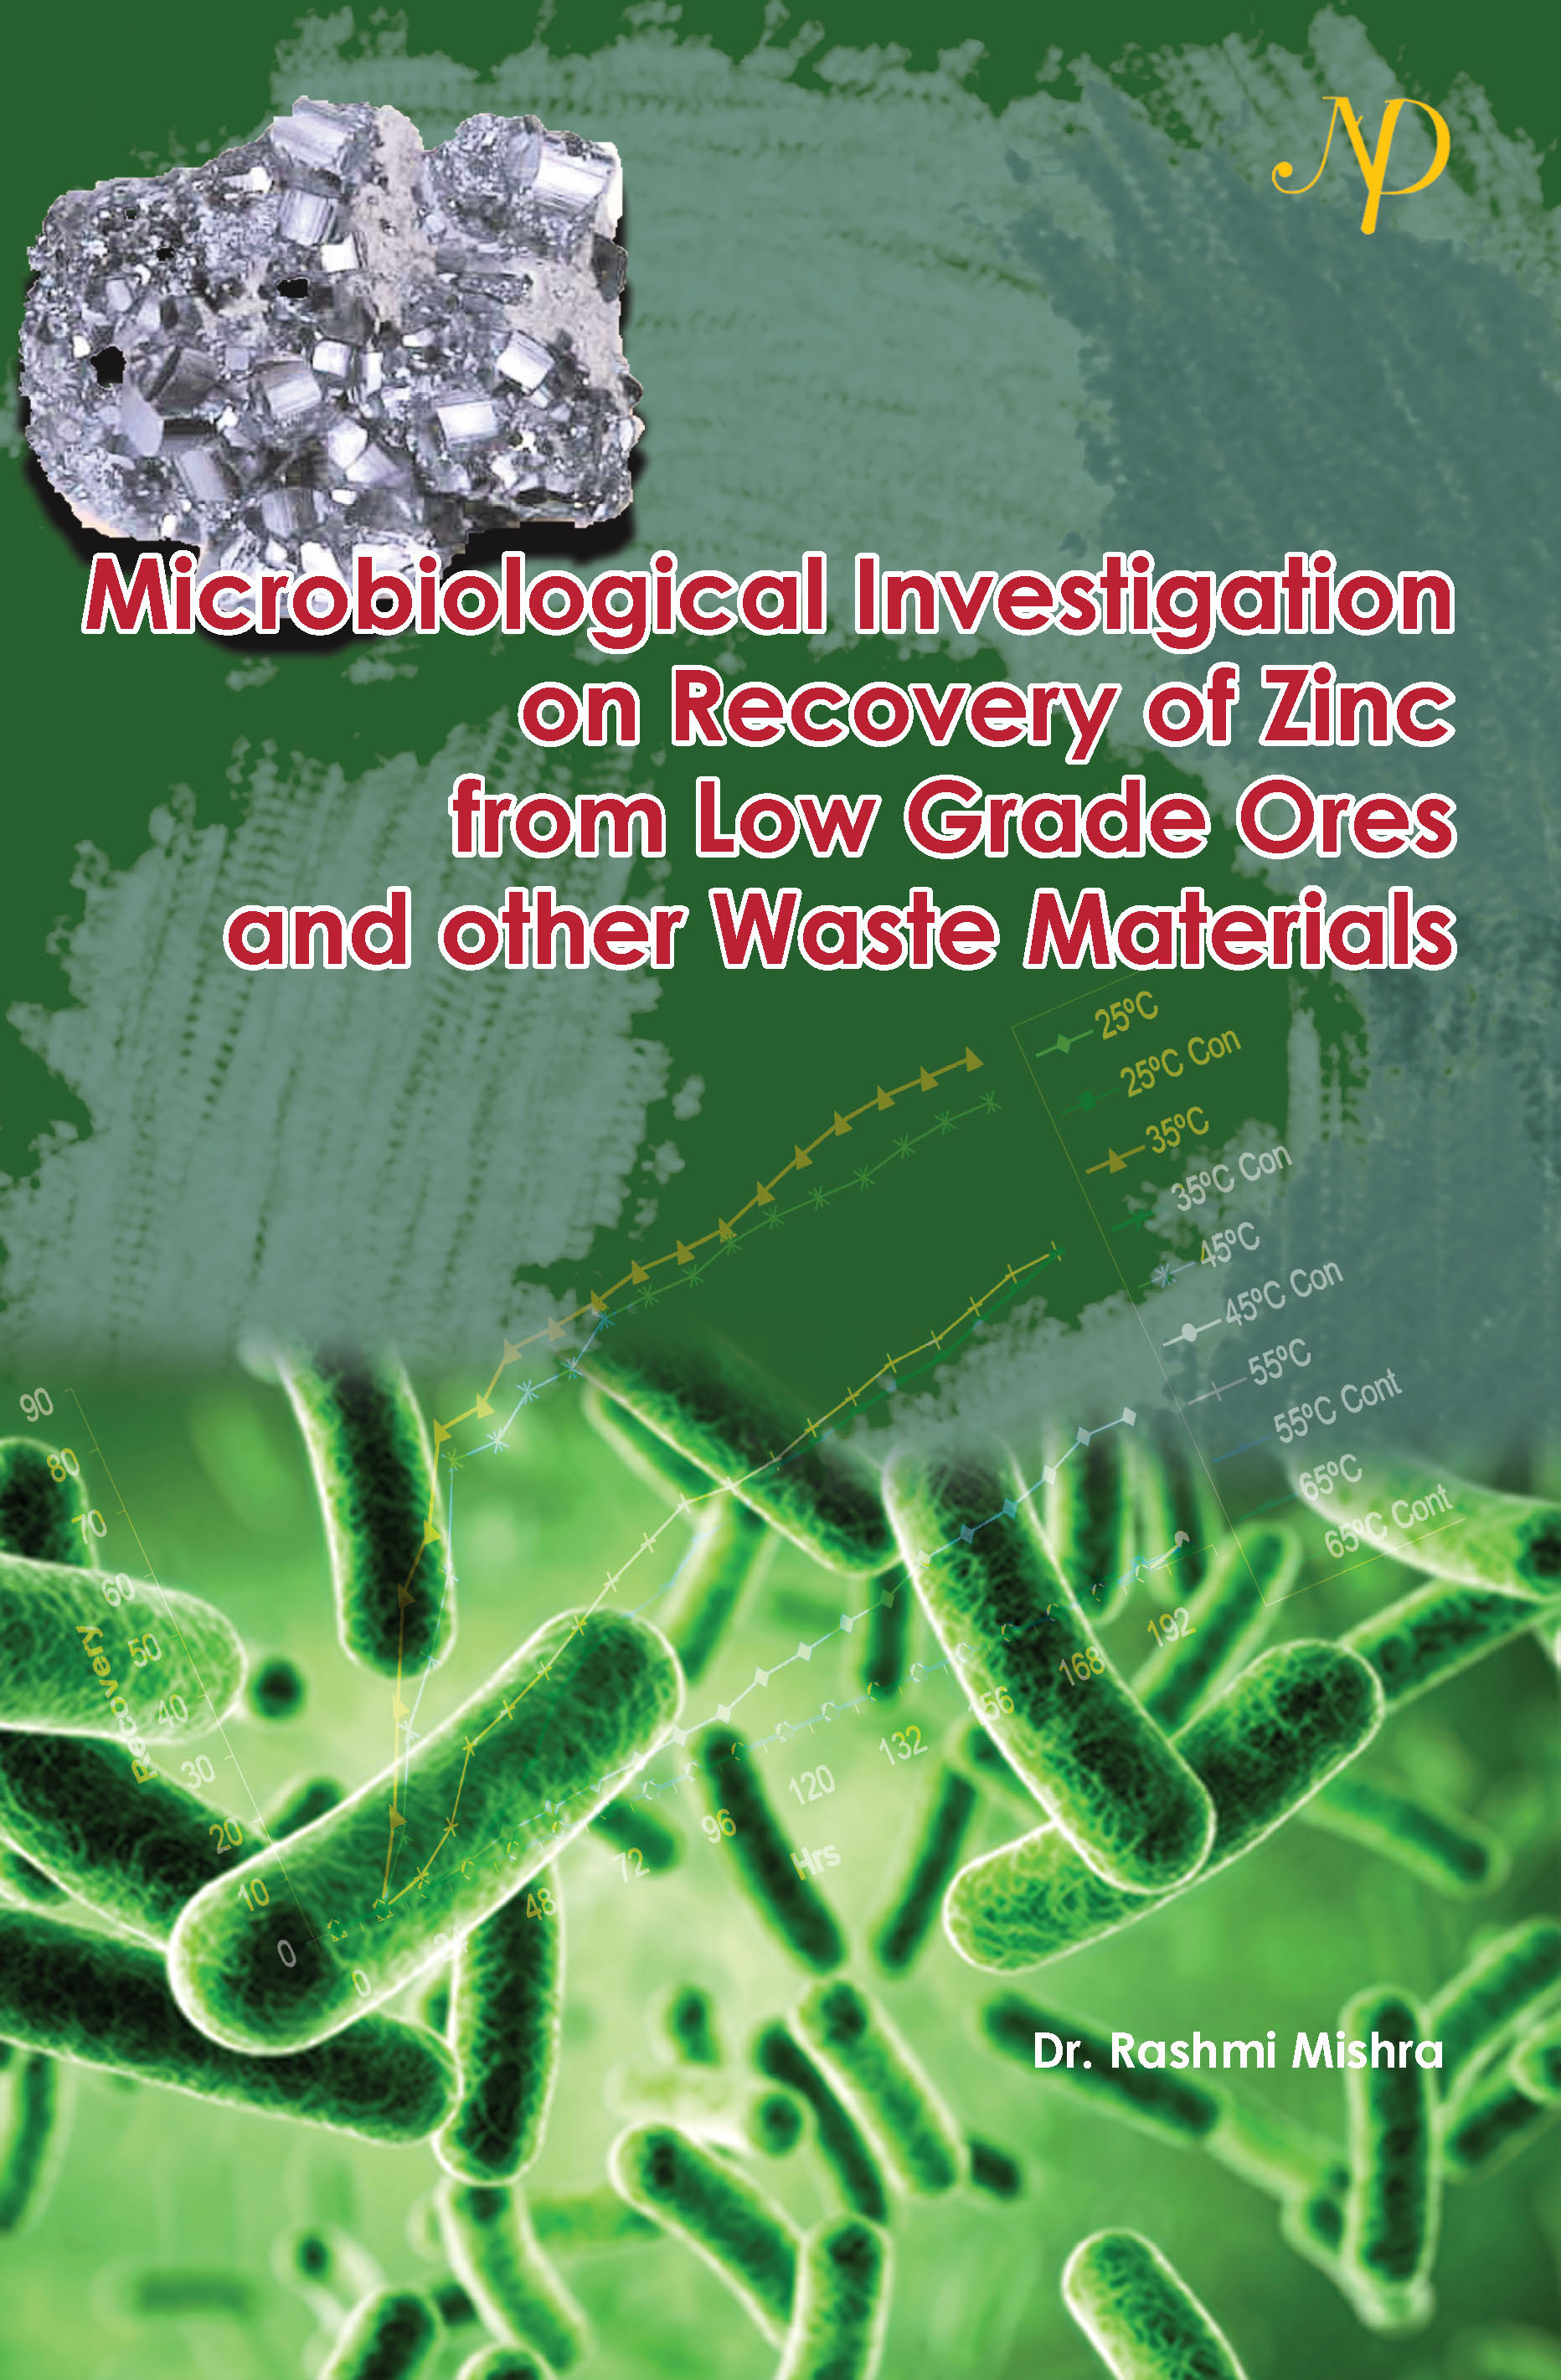 Microbiological Investigation on Recovery of Zinc from Low Grade Ores and other Waste Materials Cover final.jpg